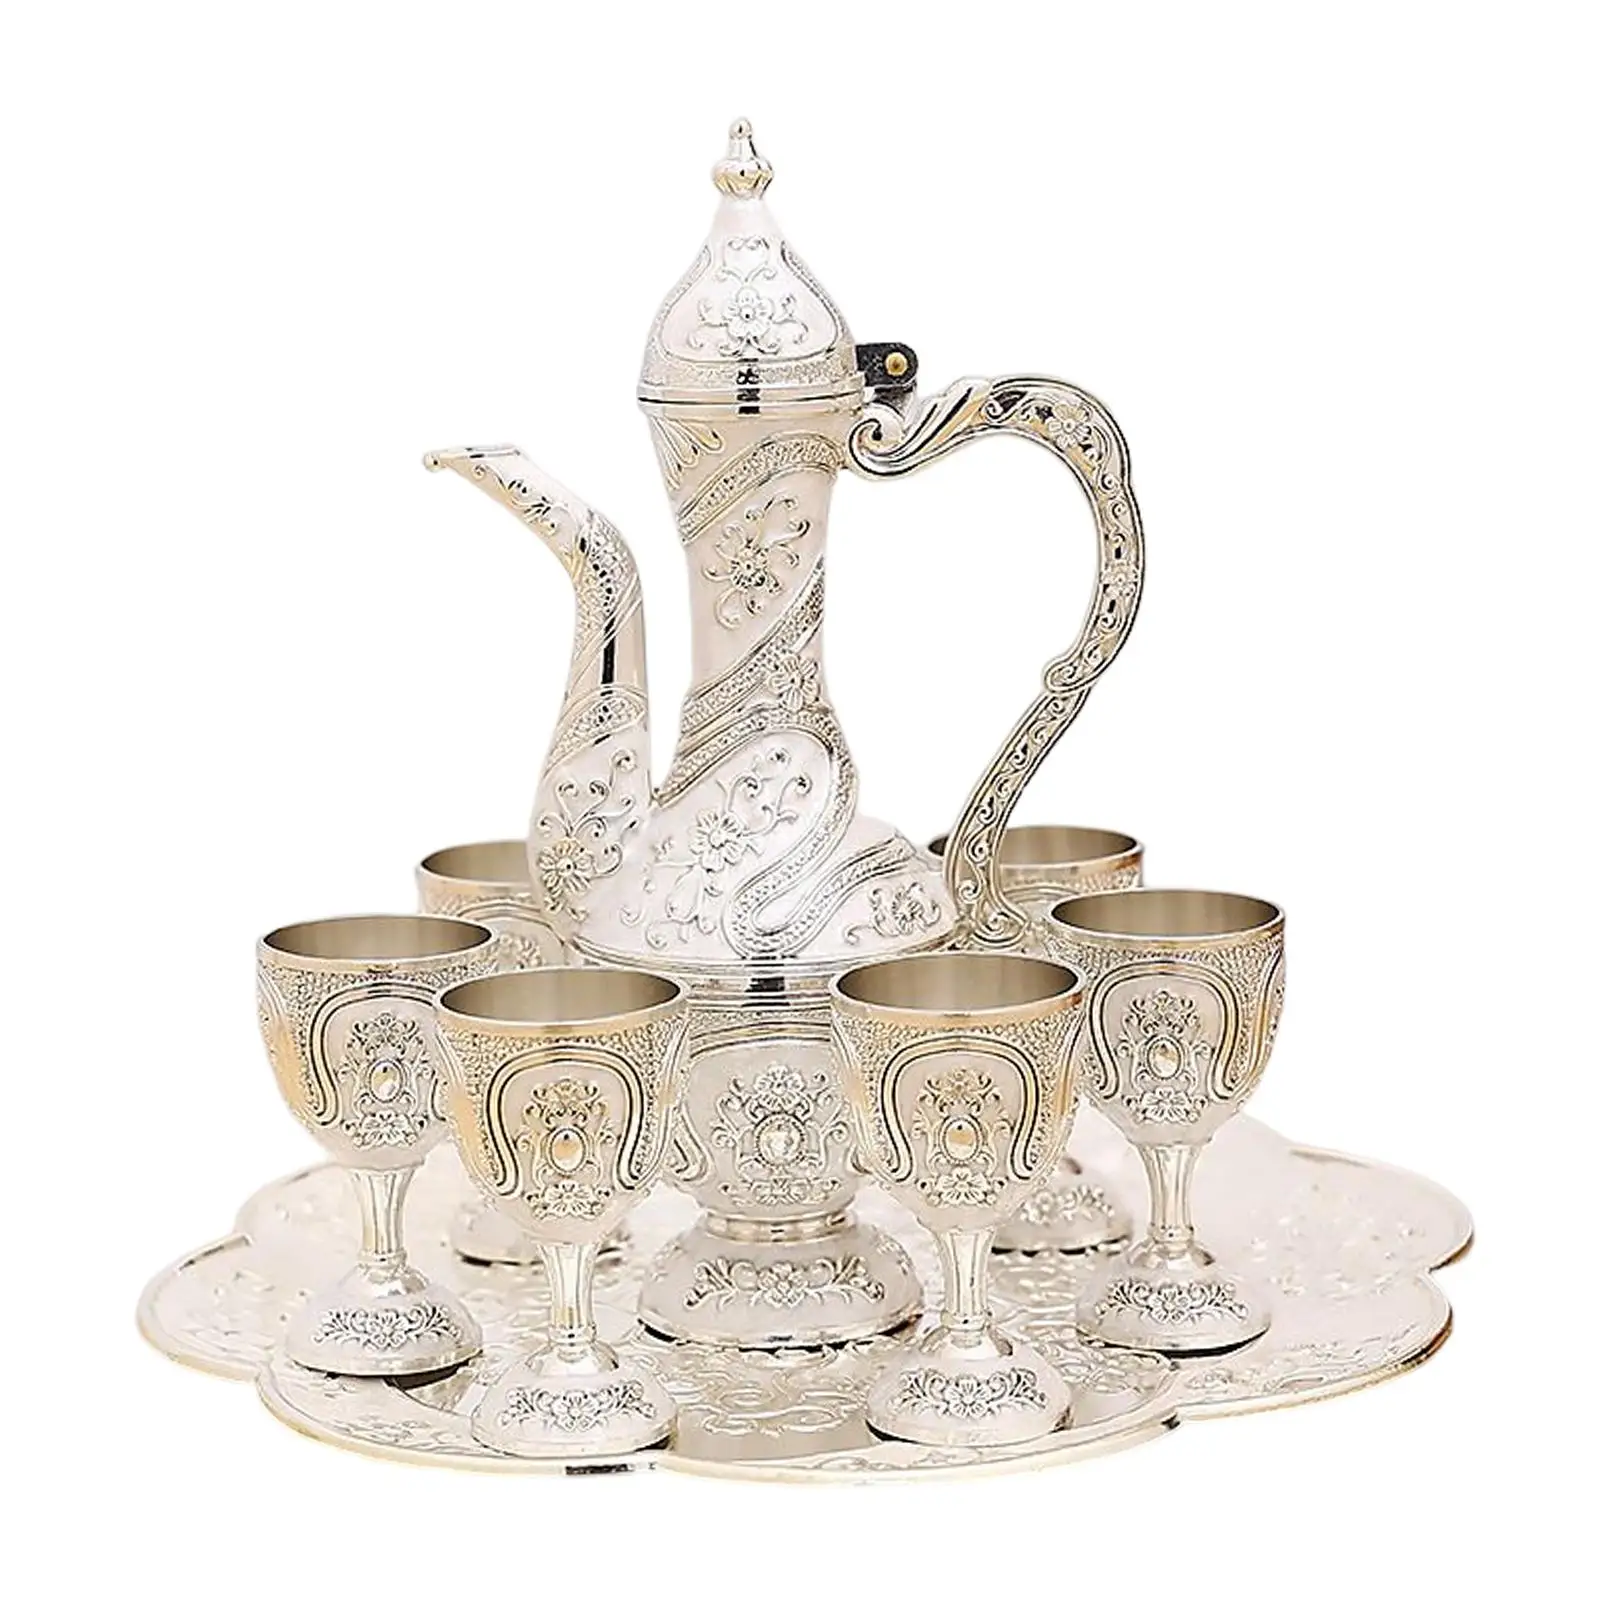 Turkish Coffee Pot Set Tea Sets with Teapot Tray and 6 Cups Art Crafts Turkish Cup Set Flagon for Serving Tea Party Gifts